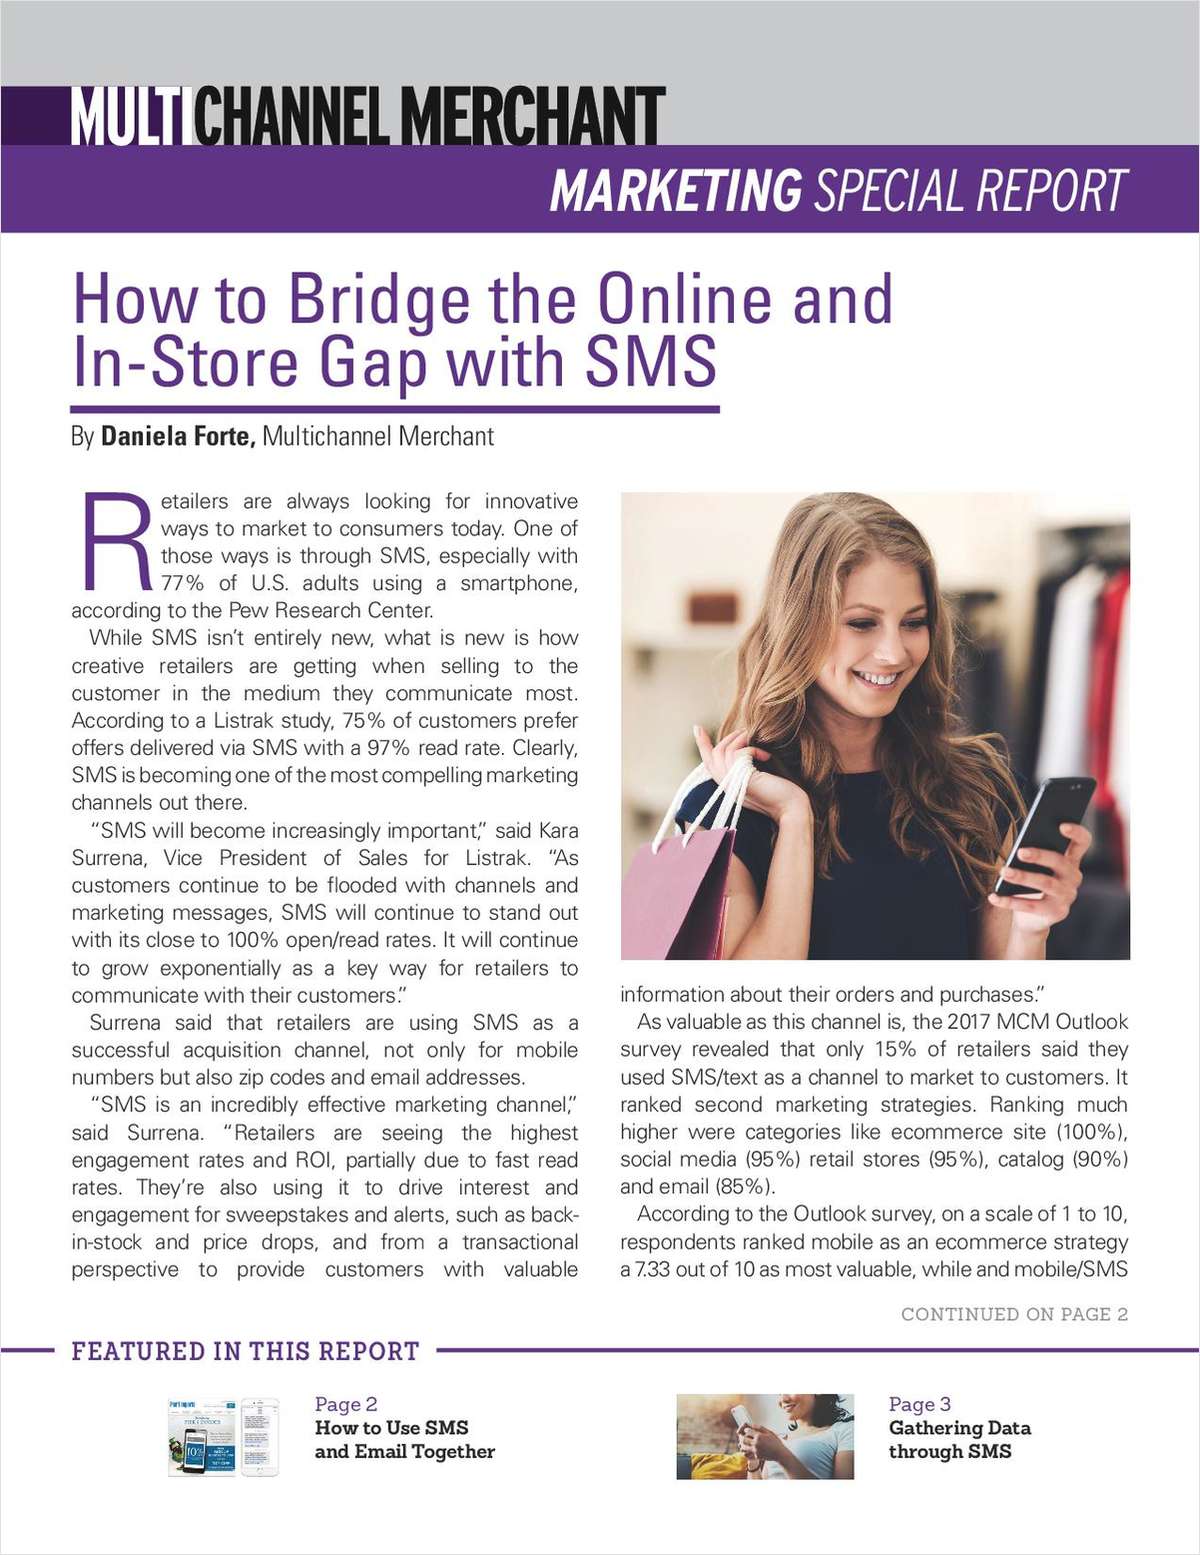 How to Enhance the Customer Experience with SMS